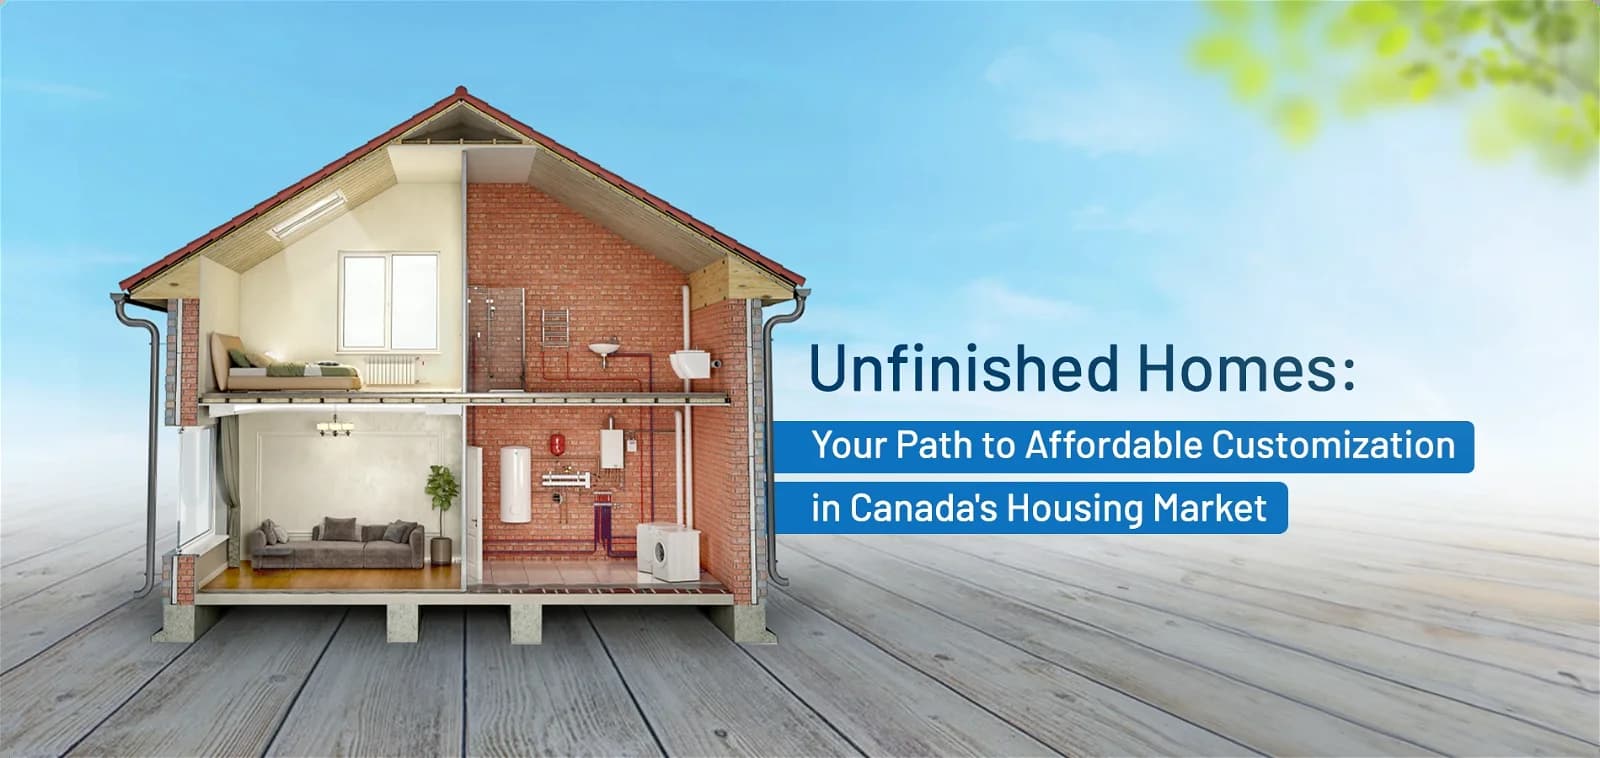 How Does Buying and Renovating Unfinished Homes Work?